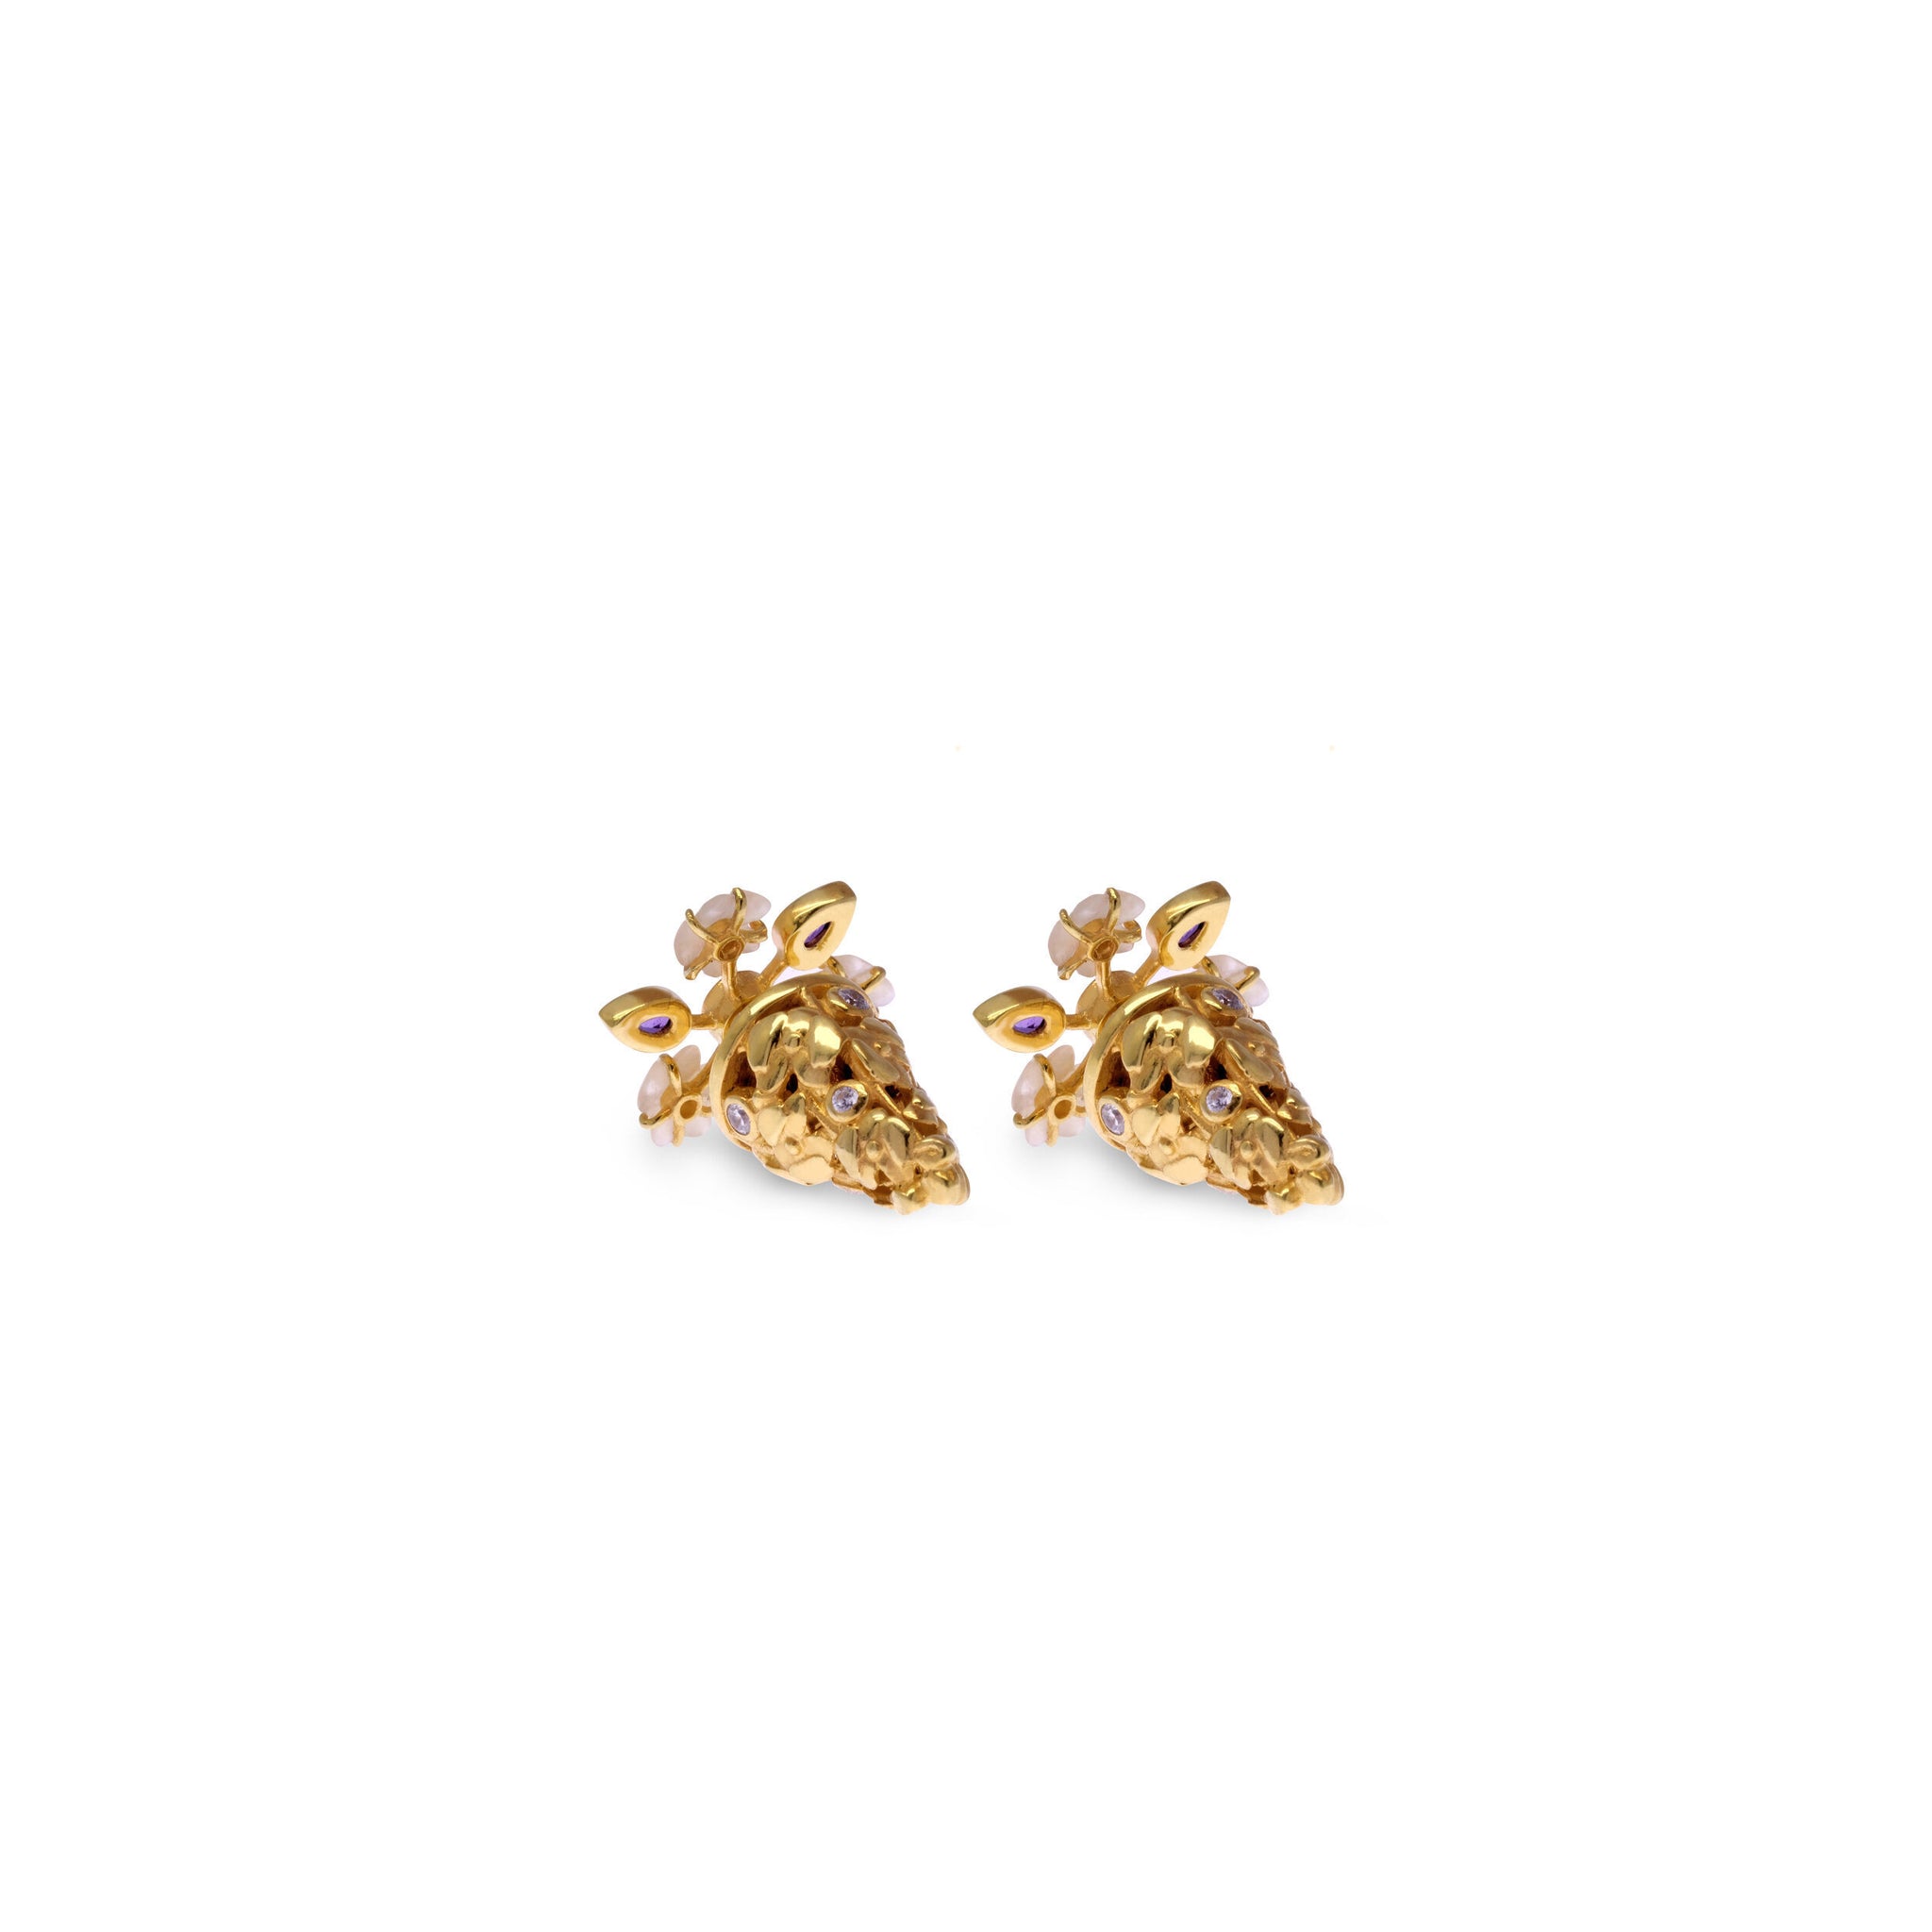 Earring Subeng Anggrek Collection Sterling Silver 925 Gold Plated